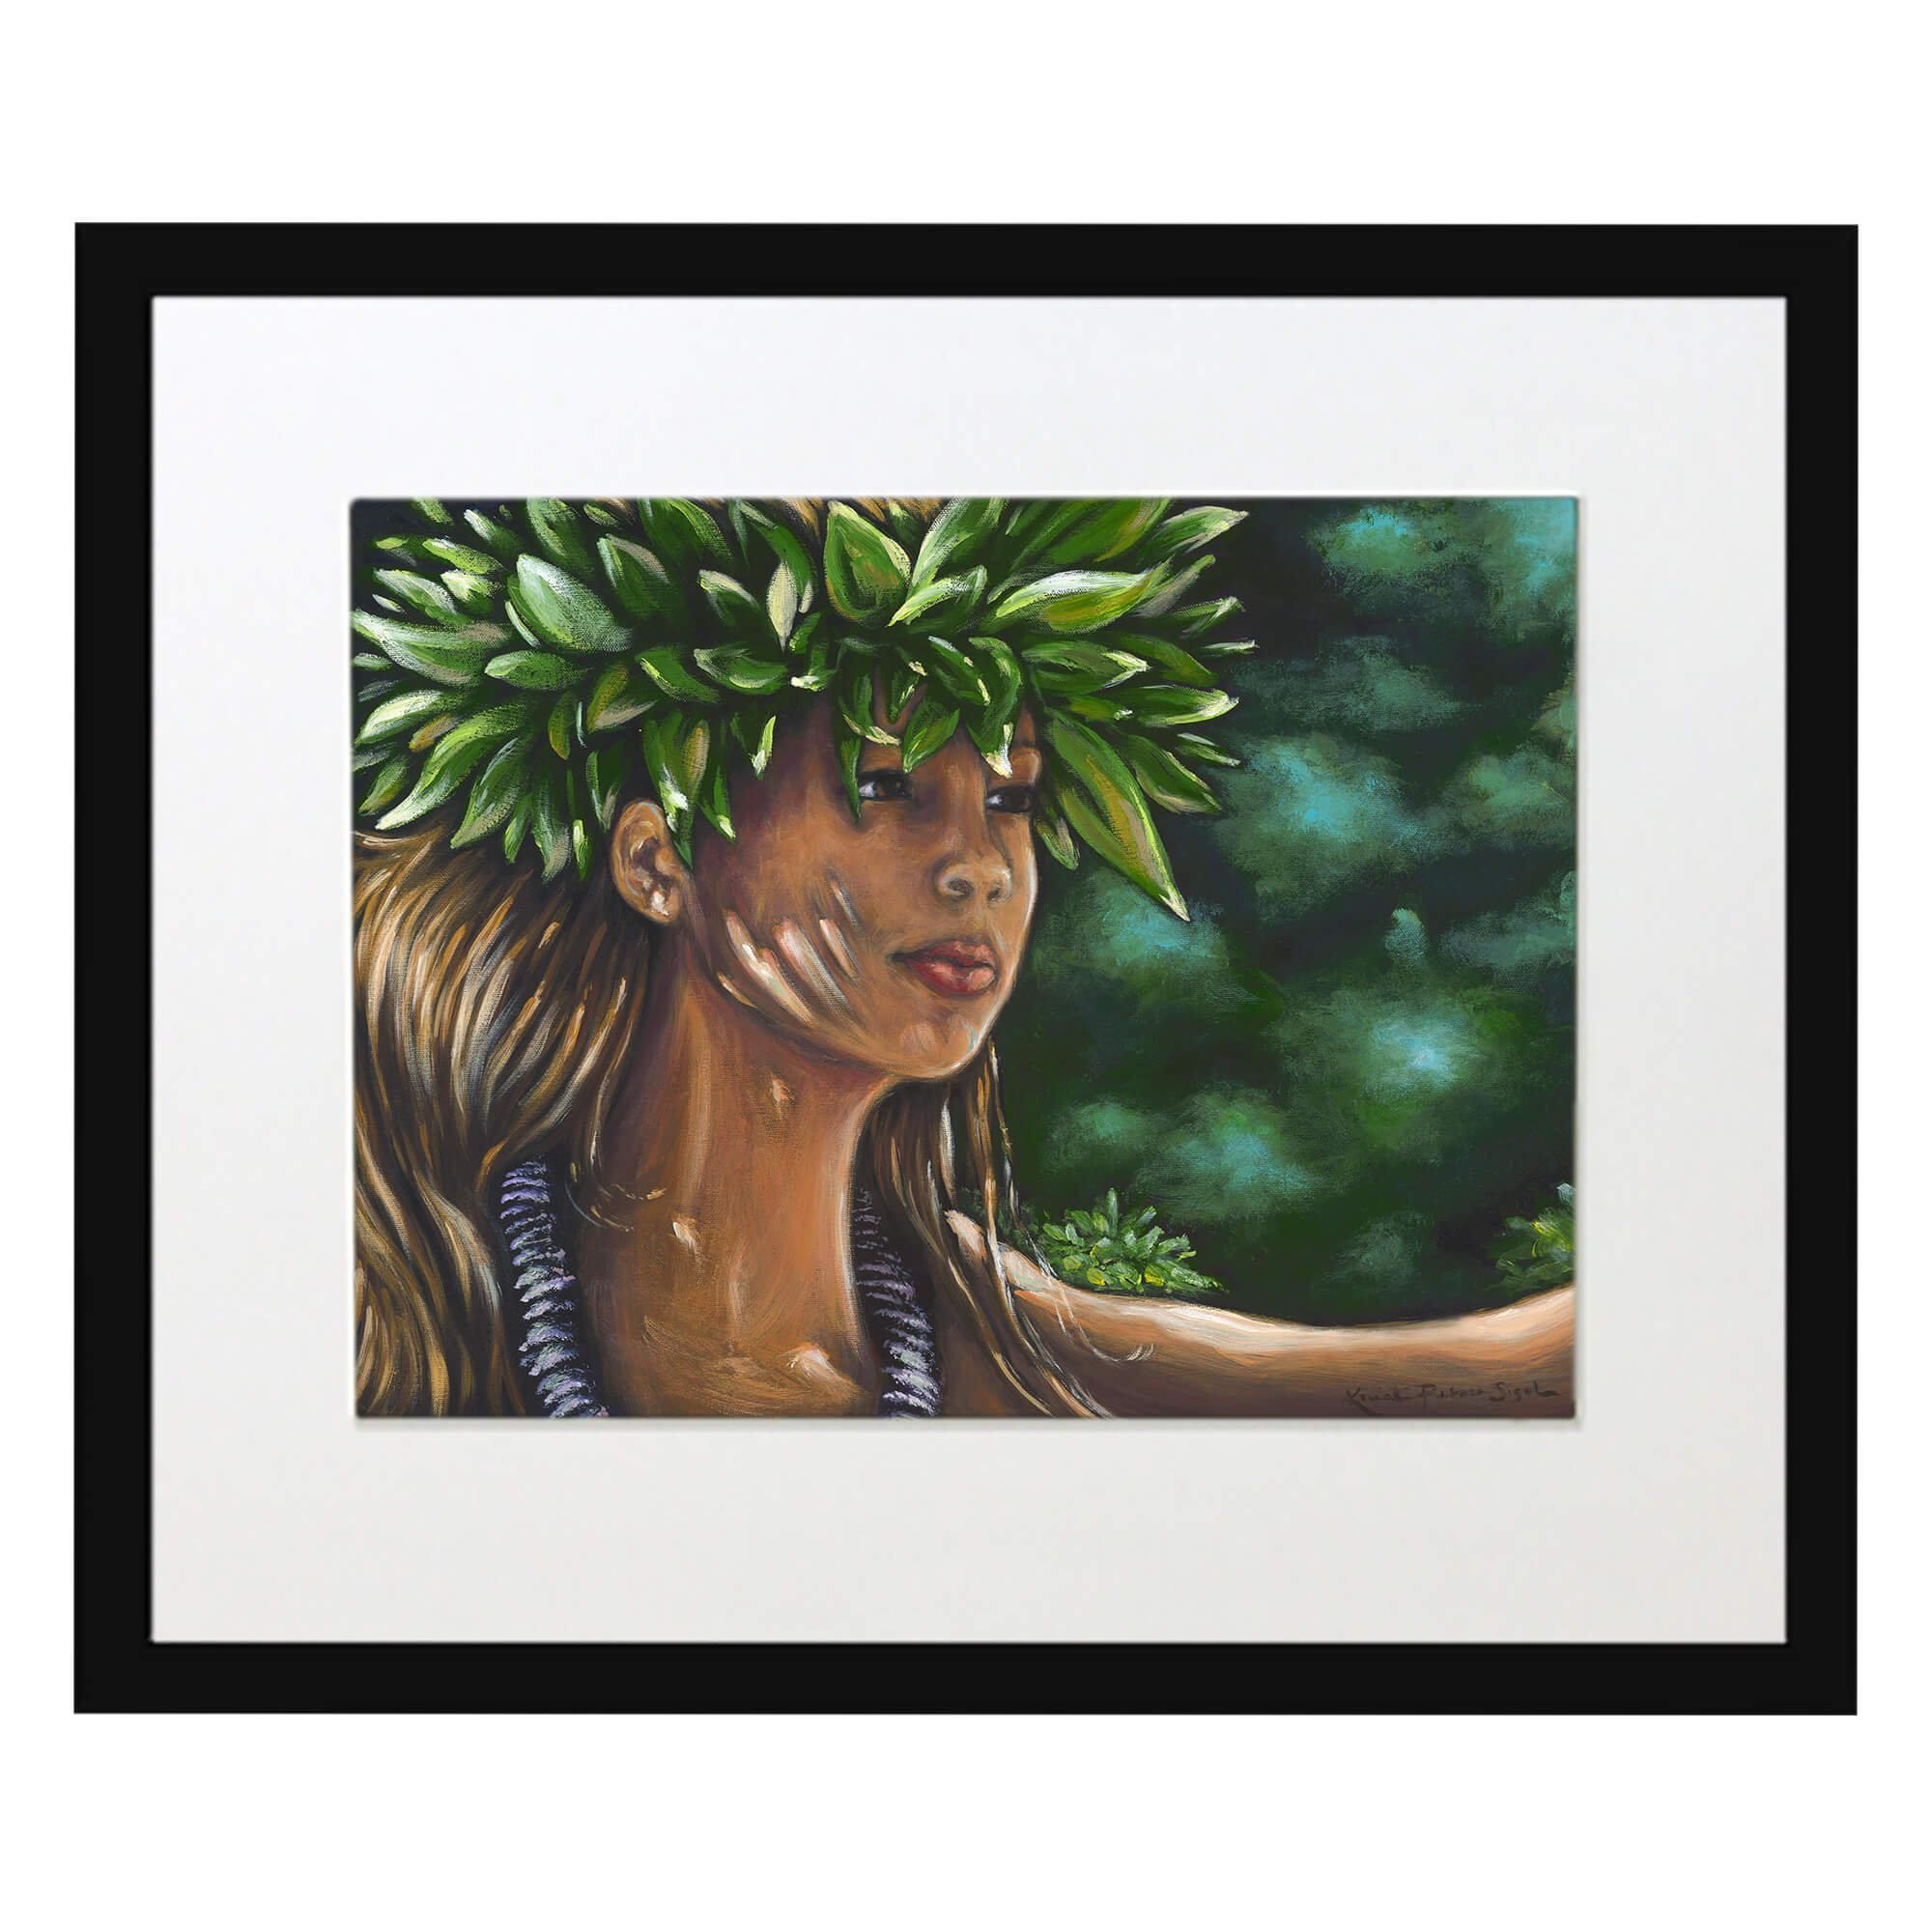 Matted art print with black frame featuring a a woman with brown eyes by hawaii artist Kristi Petosa